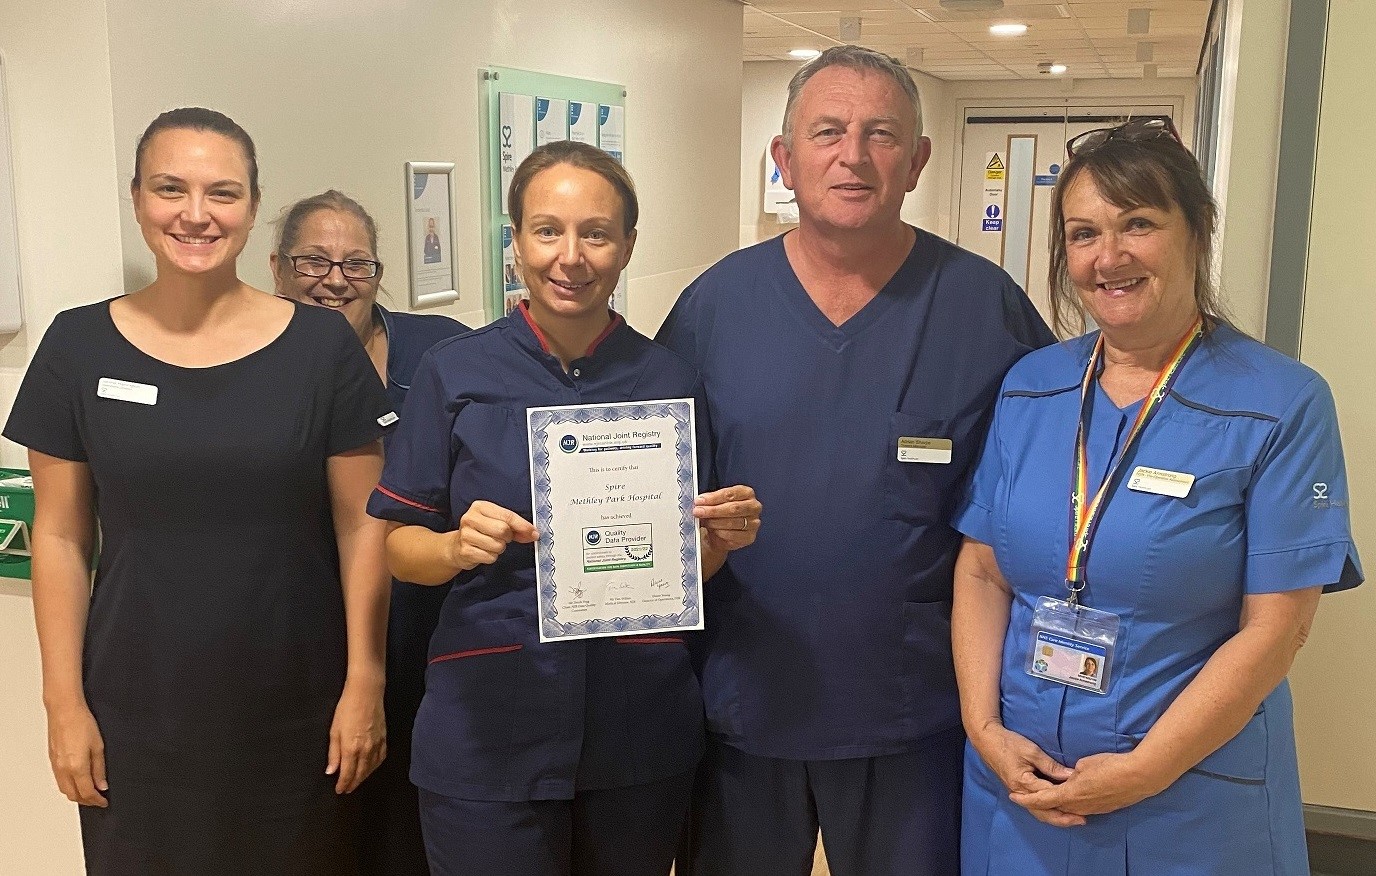 Spire Methley Park Hospital awarded for commitment to patient safety by the National Joint Registry